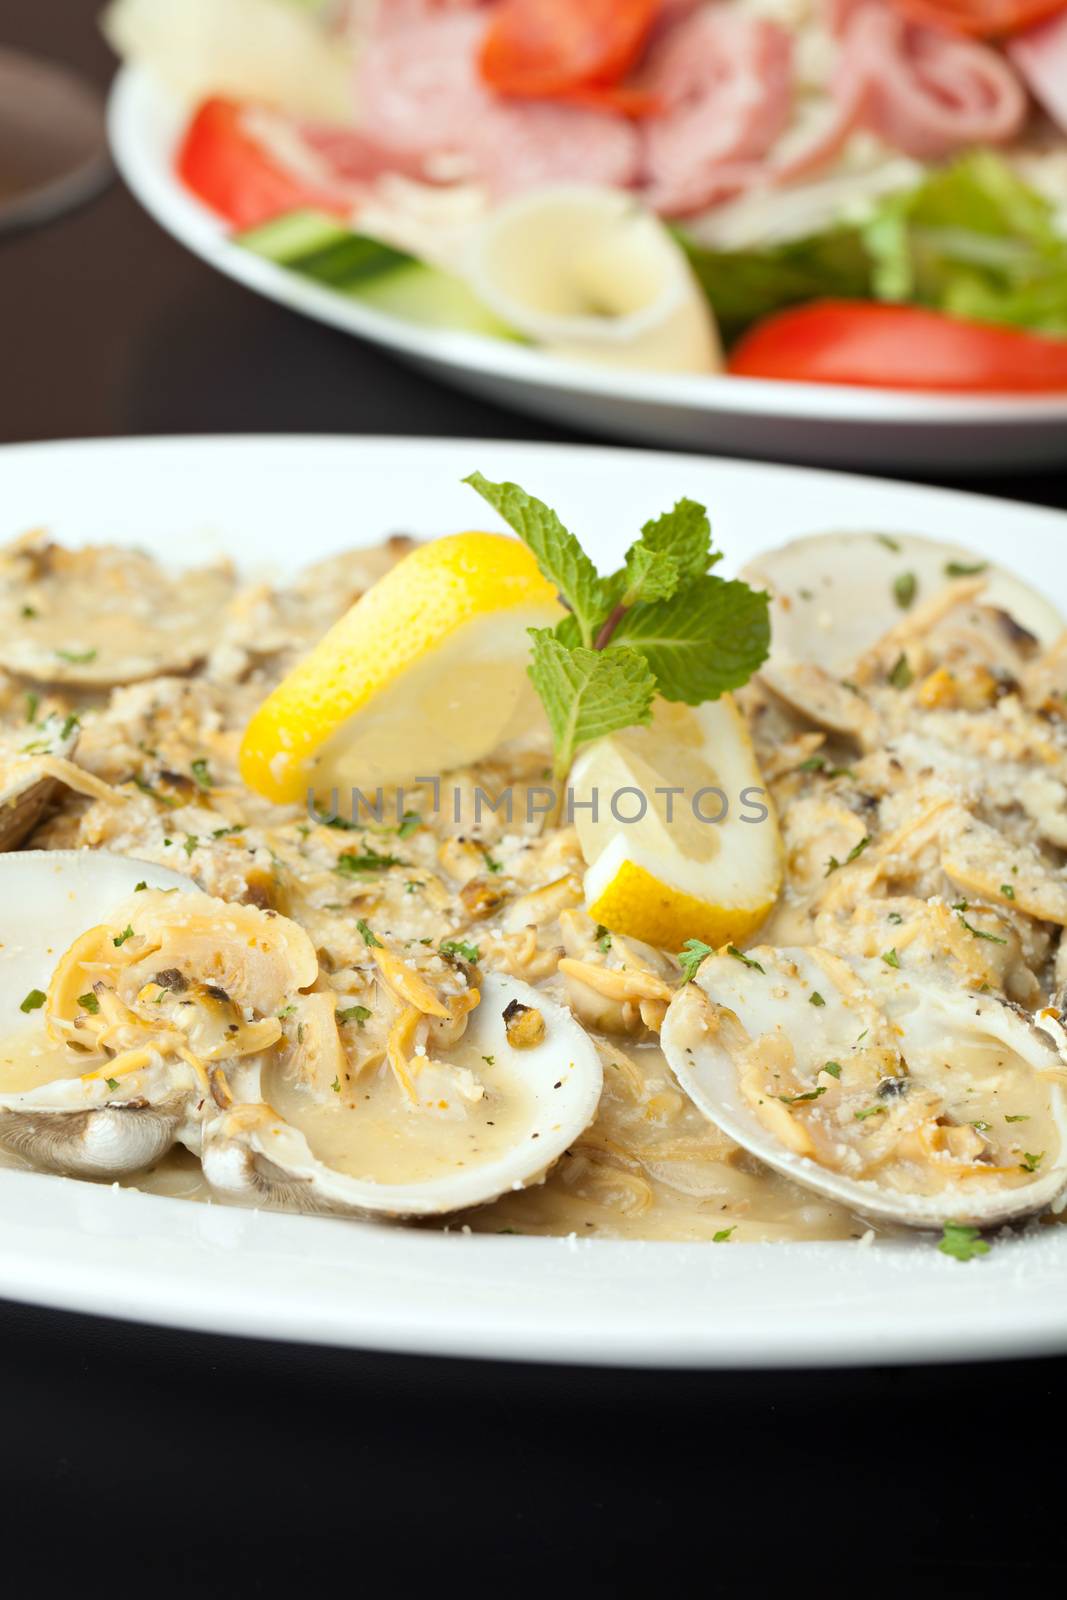 Italian pasta dish with fresh clams over pasta with herbs and cheese.  Shallow depth of field.